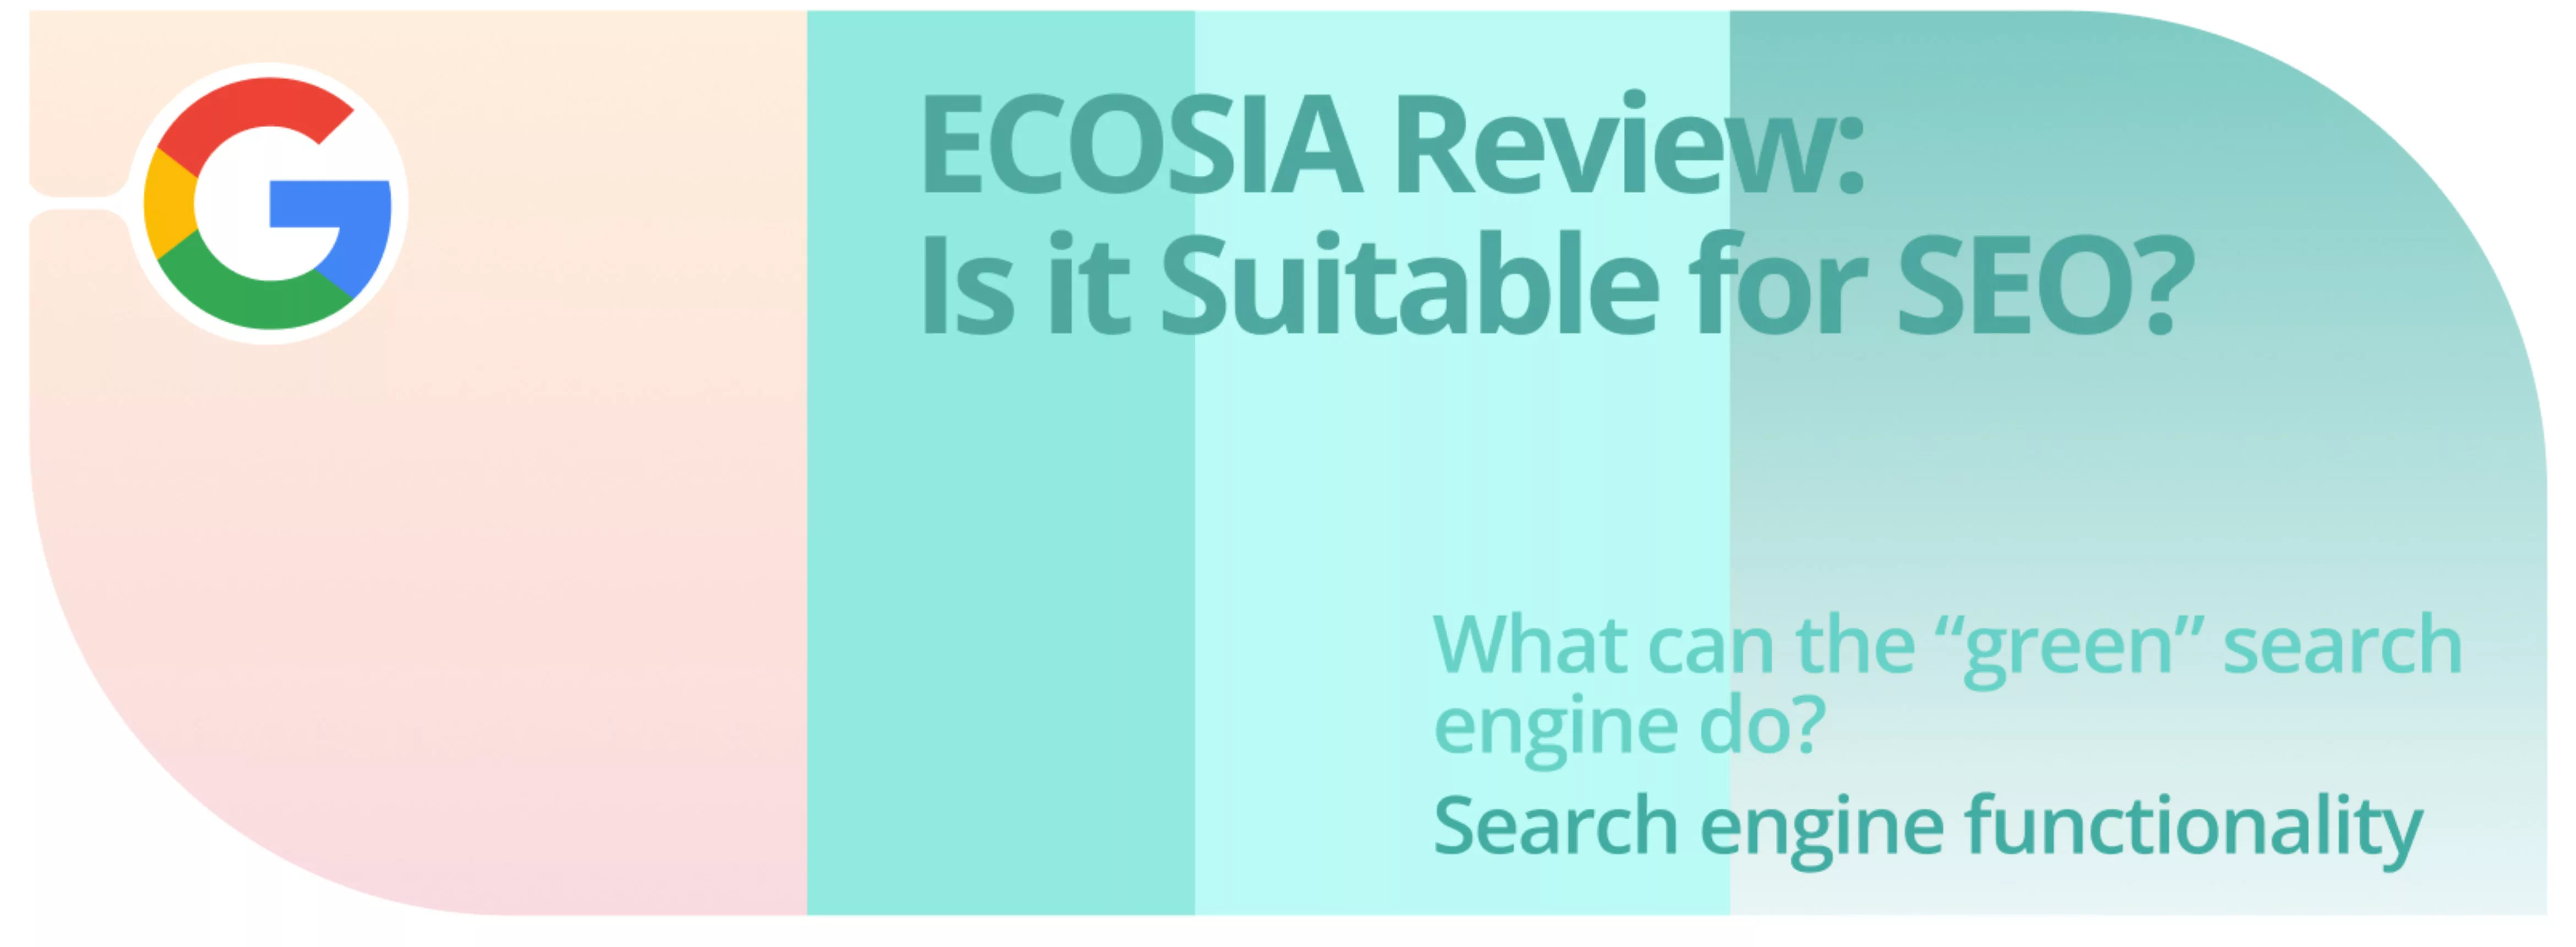 ECOSIA Review: Is it Suitable for SEO?